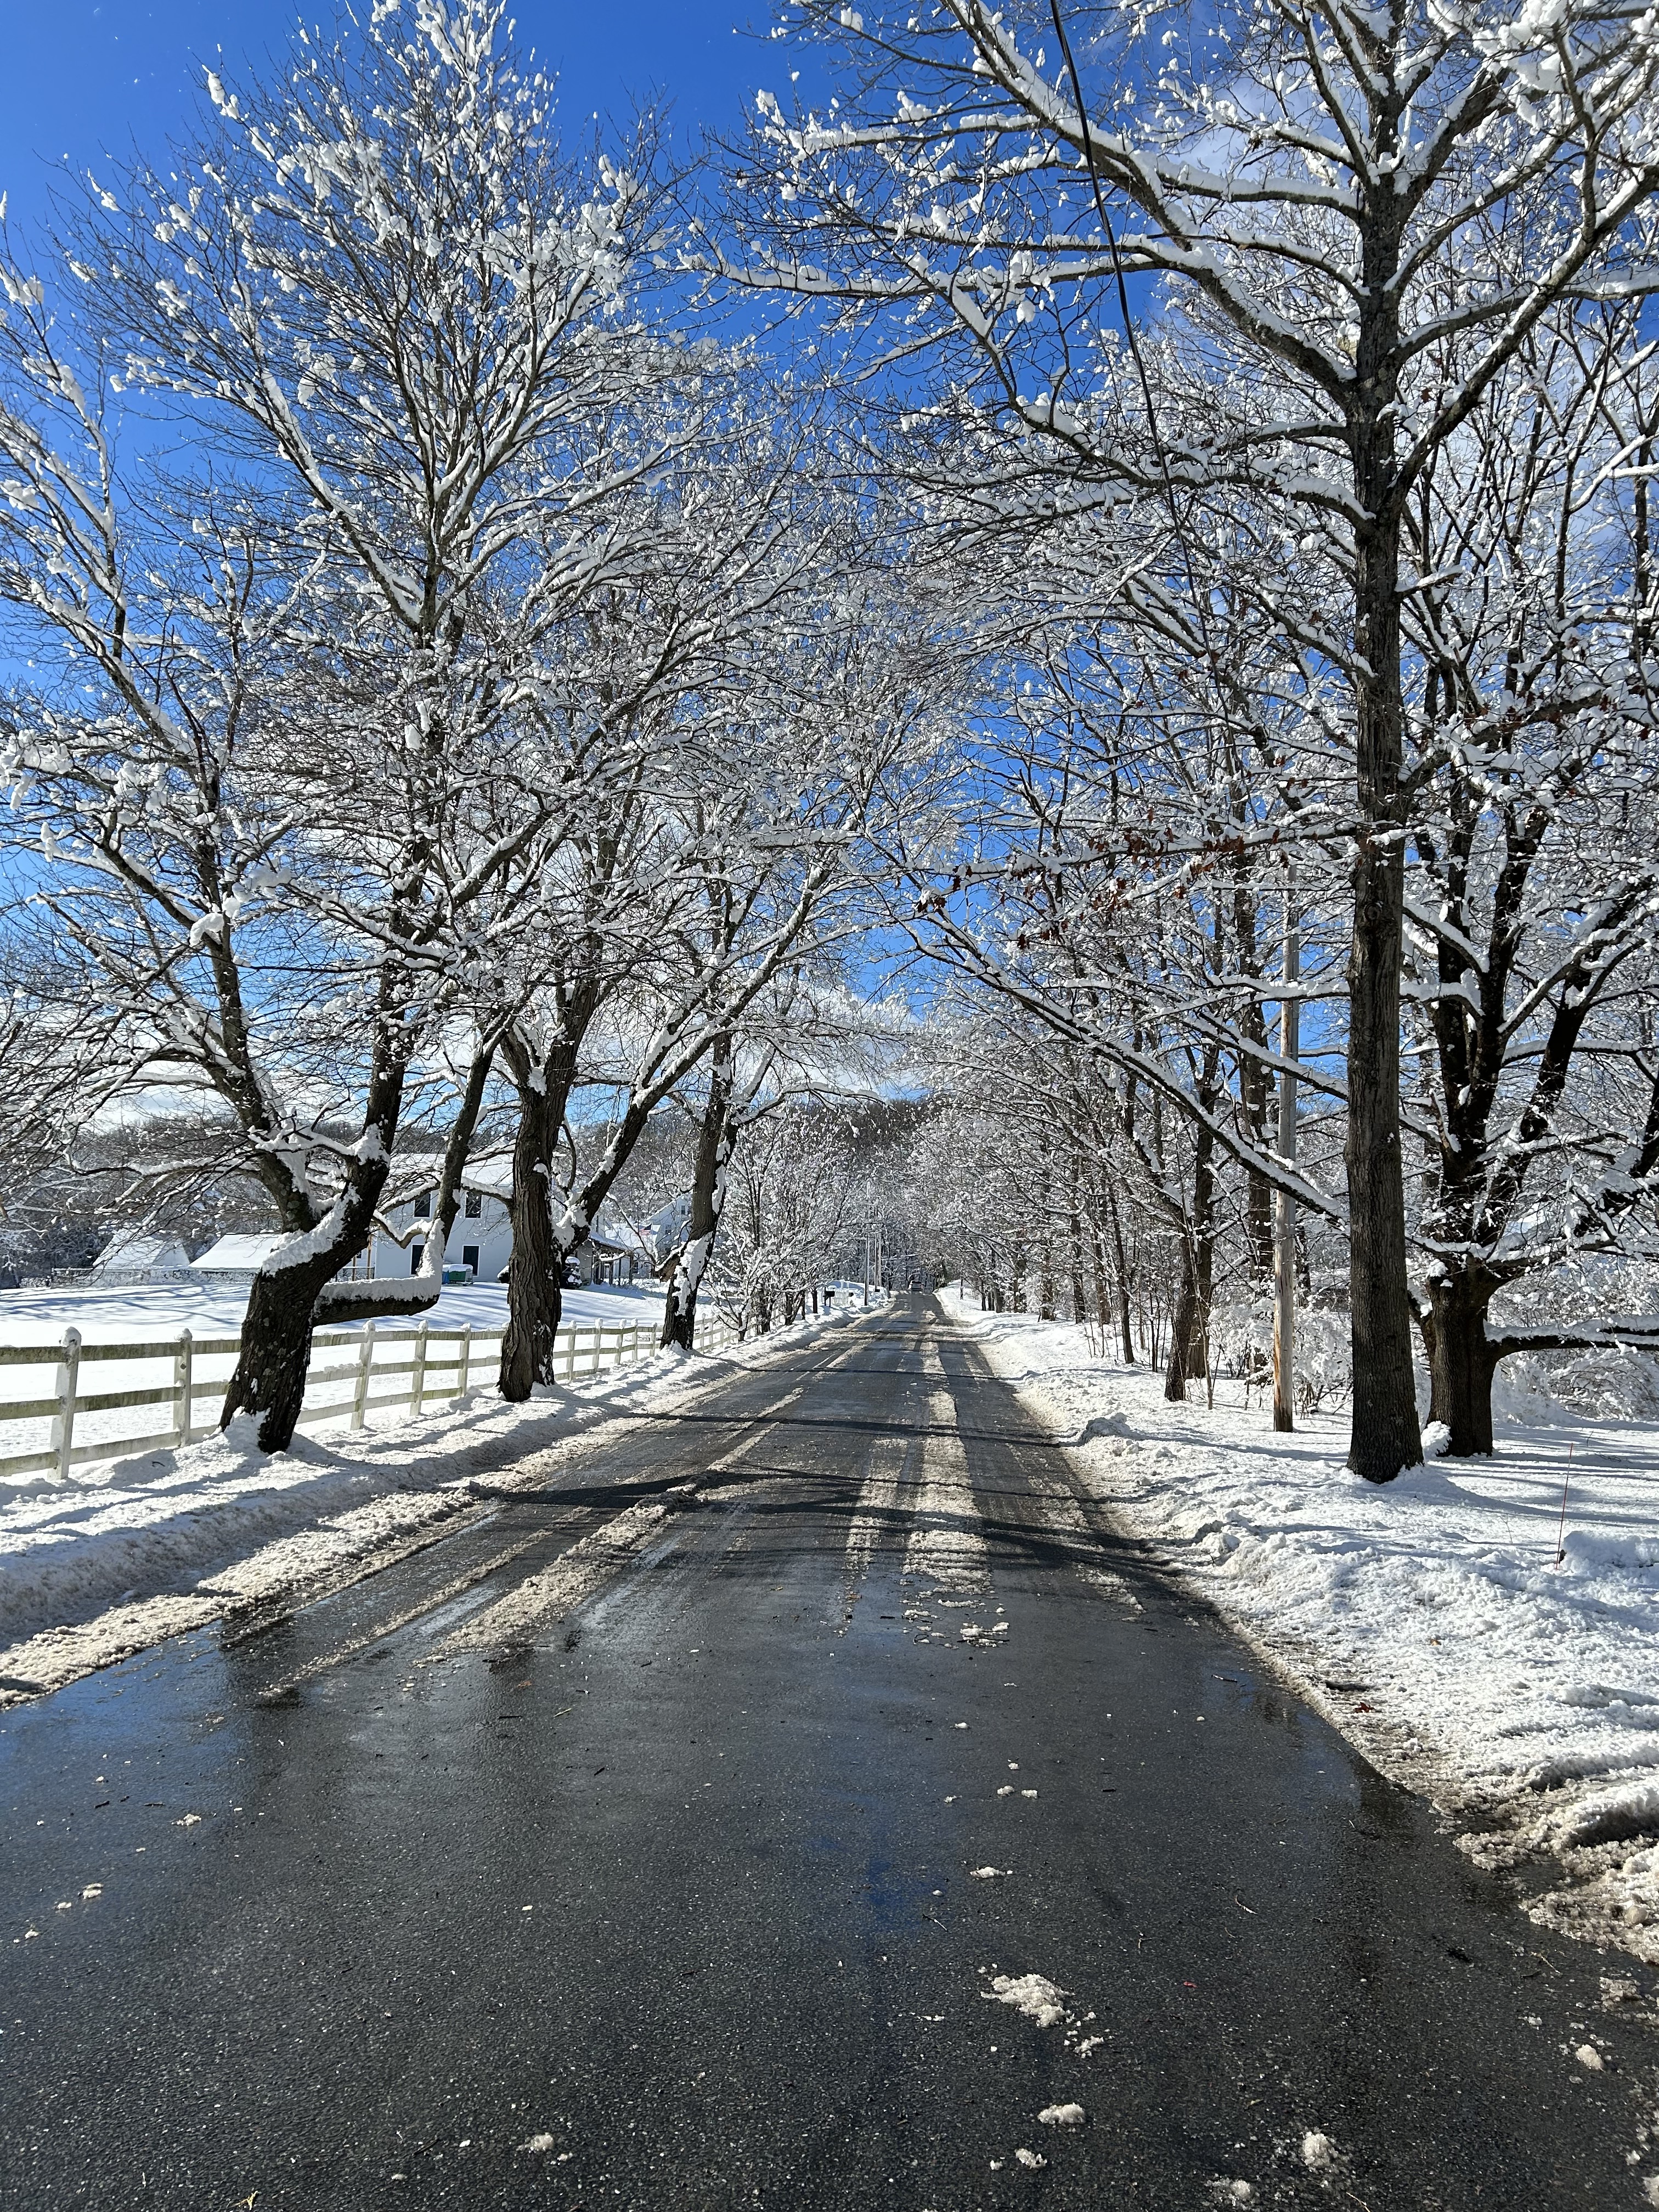 Community Snapshot: A snowy day in Westborough